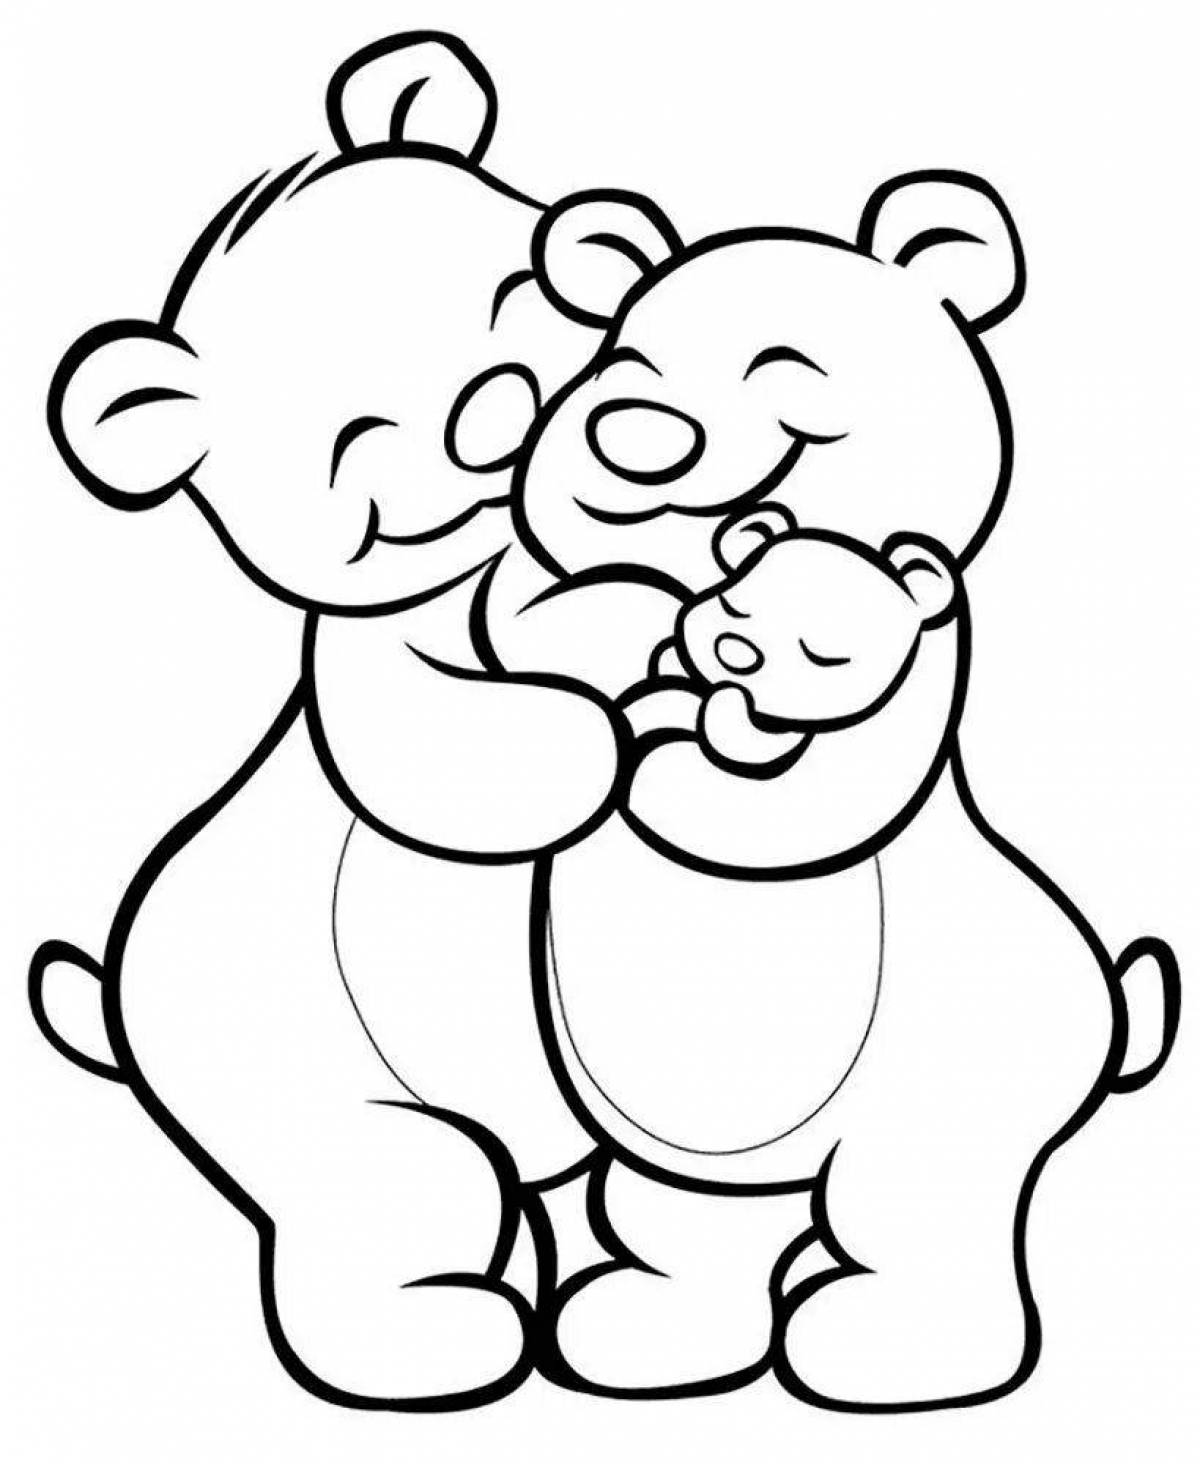 Relaxing bear family coloring page